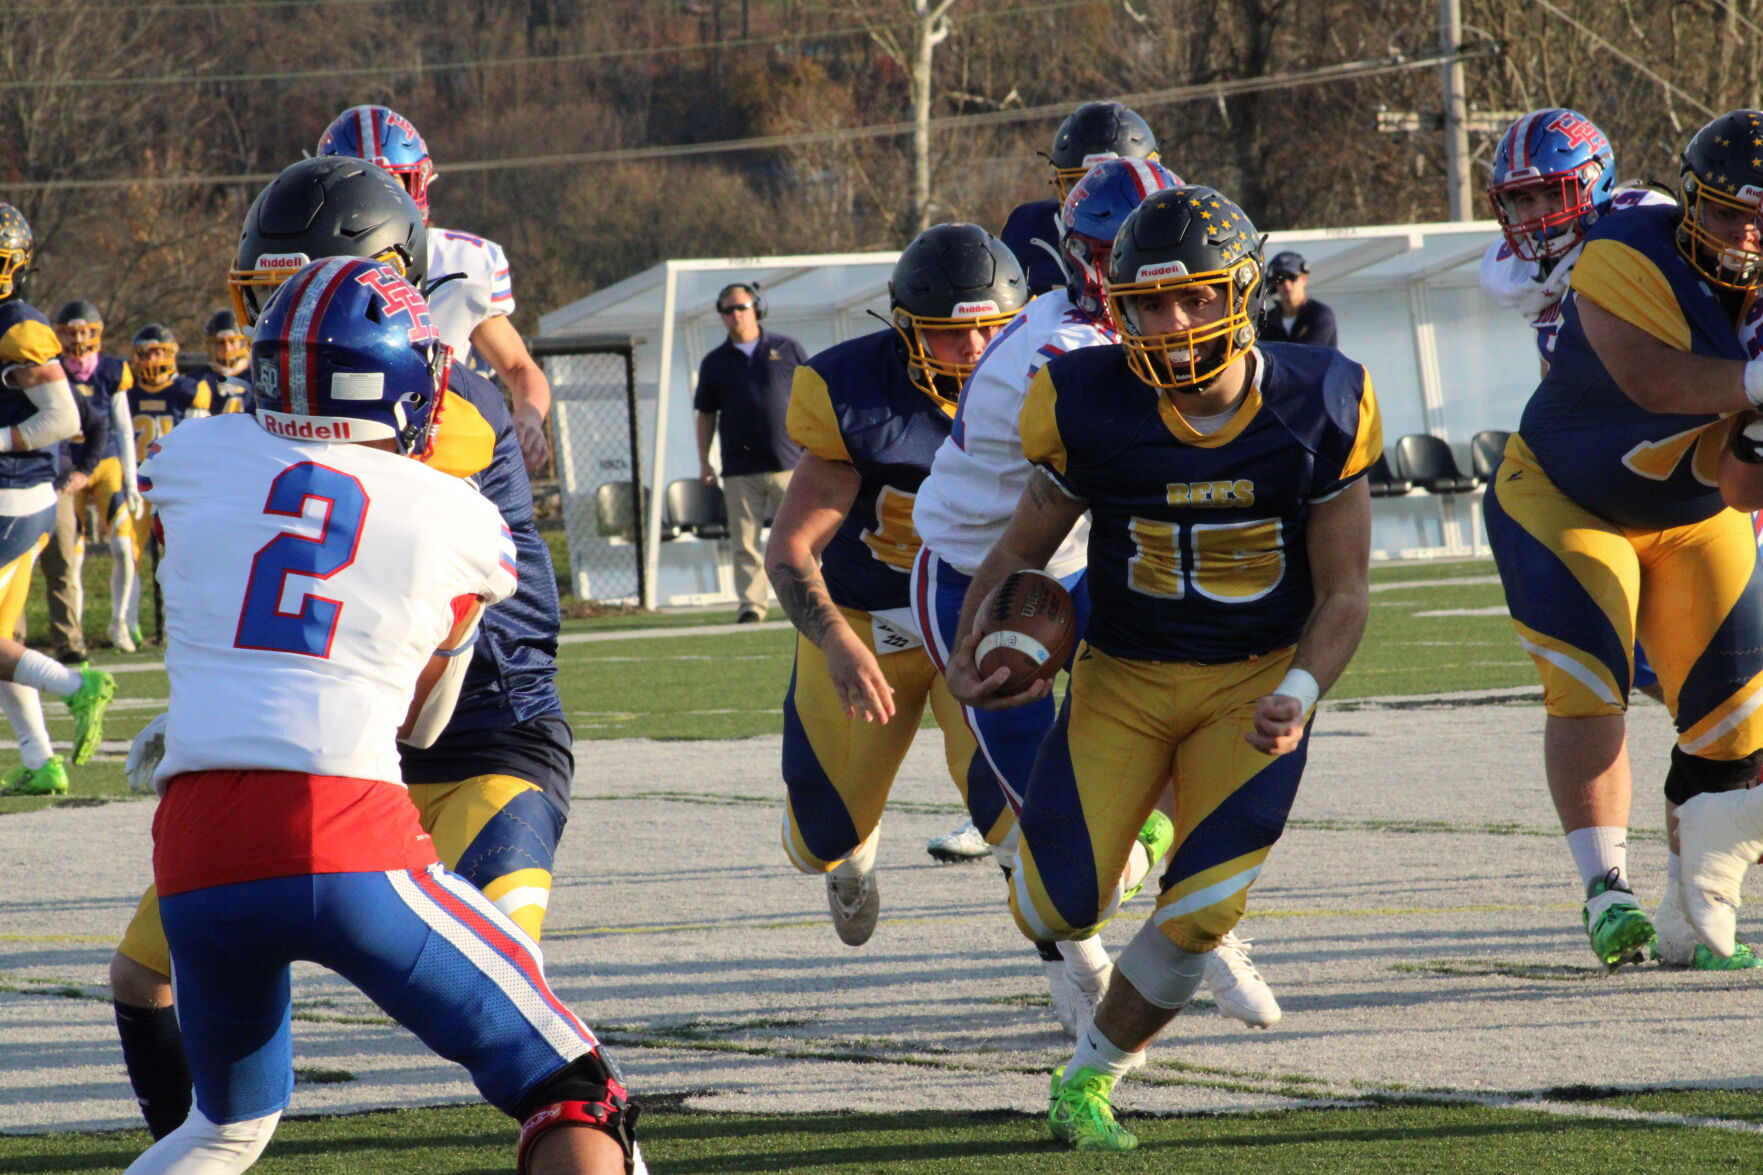 East Fairmont’s Historic Season Ends with Tough Loss to Herbert Hoover in Playoffs